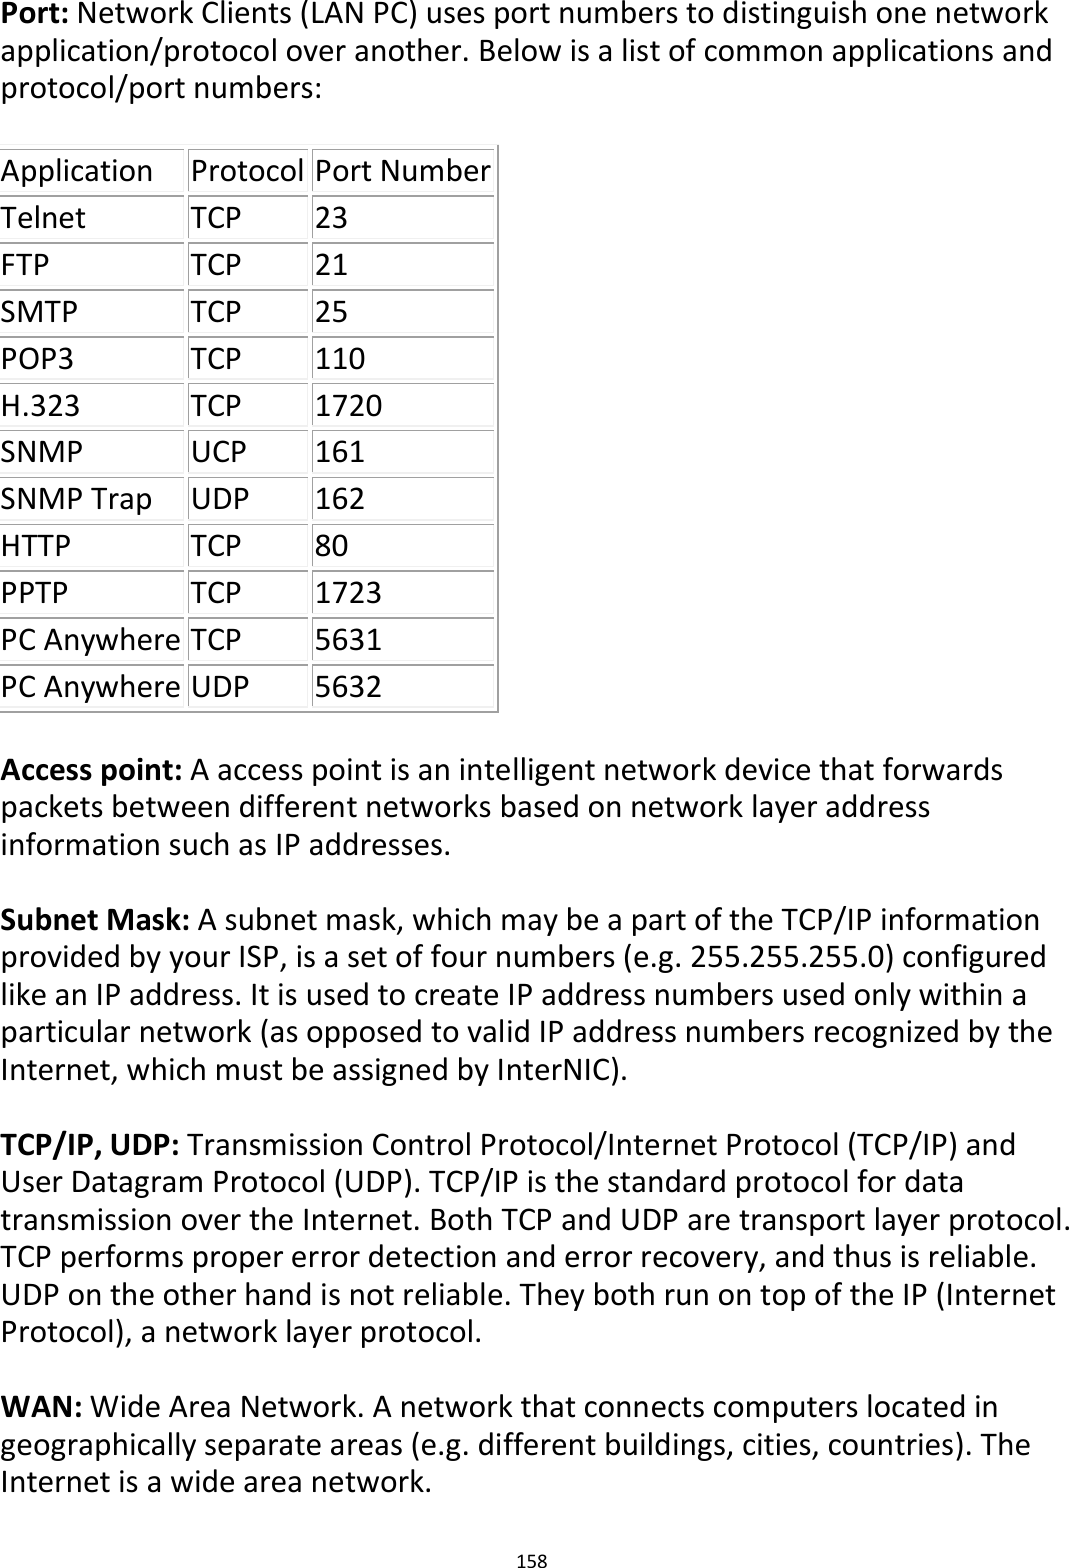 158  Port: Network Clients (LAN PC) uses port numbers to distinguish one network application/protocol over another. Below is a list of common applications and protocol/port numbers:  Application Protocol Port Number Telnet TCP 23 FTP TCP 21 SMTP TCP 25 POP3 TCP 110 H.323 TCP 1720 SNMP UCP 161 SNMP Trap UDP 162 HTTP TCP 80 PPTP TCP 1723 PC Anywhere TCP 5631 PC Anywhere UDP 5632  Access point: A access point is an intelligent network device that forwards packets between different networks based on network layer address information such as IP addresses.  Subnet Mask: A subnet mask, which may be a part of the TCP/IP information provided by your ISP, is a set of four numbers (e.g. 255.255.255.0) configured like an IP address. It is used to create IP address numbers used only within a particular network (as opposed to valid IP address numbers recognized by the Internet, which must be assigned by InterNIC).    TCP/IP, UDP: Transmission Control Protocol/Internet Protocol (TCP/IP) and User Datagram Protocol (UDP). TCP/IP is the standard protocol for data transmission over the Internet. Both TCP and UDP are transport layer protocol. TCP performs proper error detection and error recovery, and thus is reliable. UDP on the other hand is not reliable. They both run on top of the IP (Internet Protocol), a network layer protocol.  WAN: Wide Area Network. A network that connects computers located in geographically separate areas (e.g. different buildings, cities, countries). The Internet is a wide area network.  